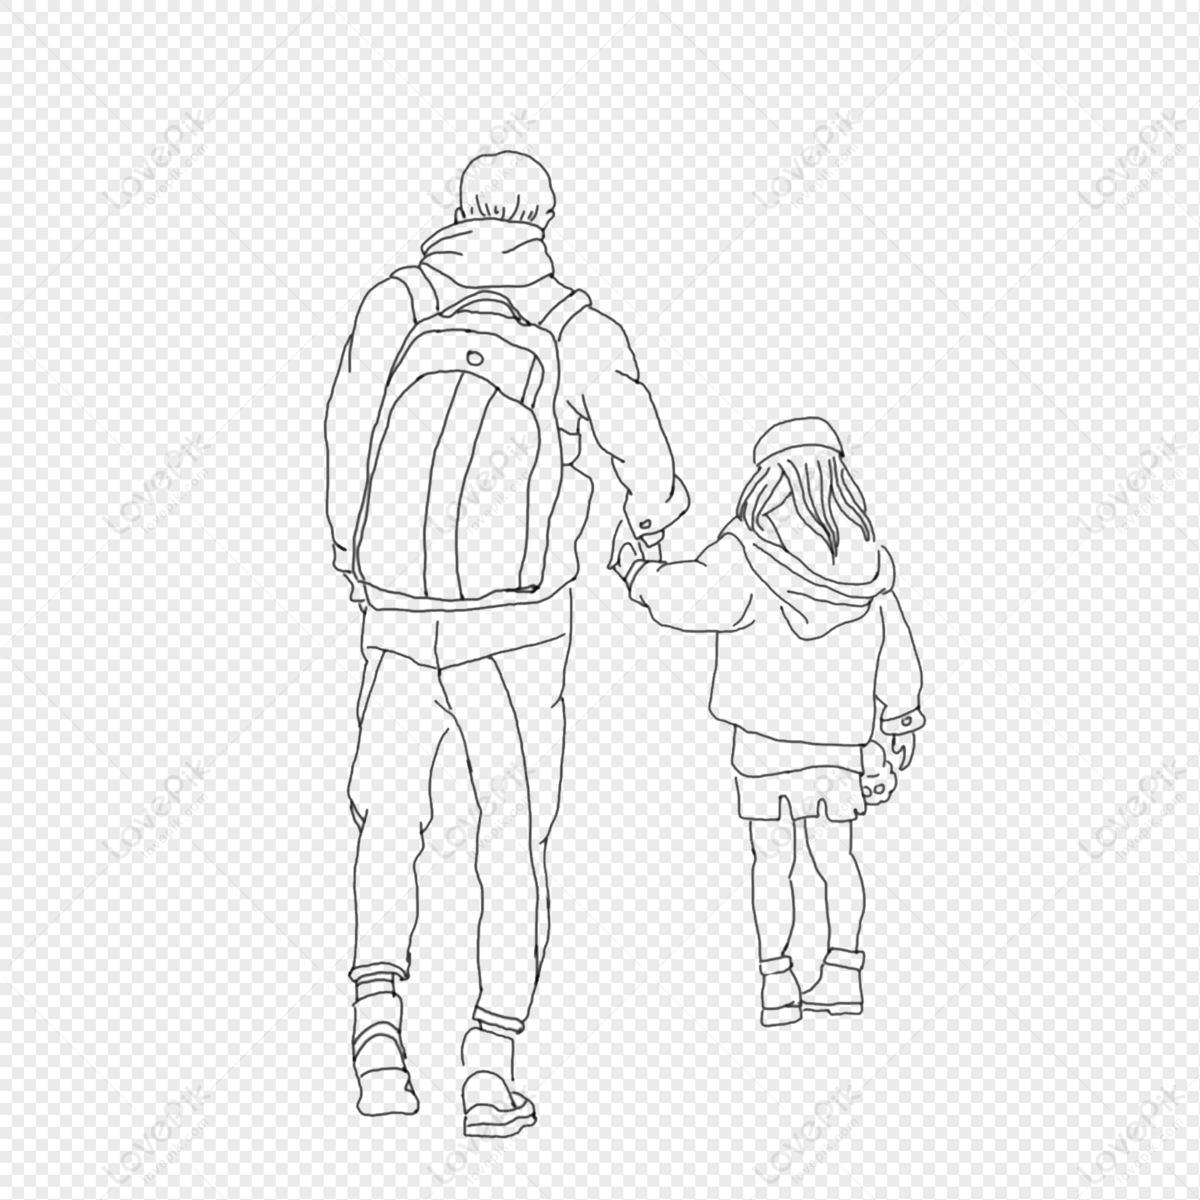 14 Heartwarming Illustrations Showing Love Between Dads And Their Little  Girls | DeMilked